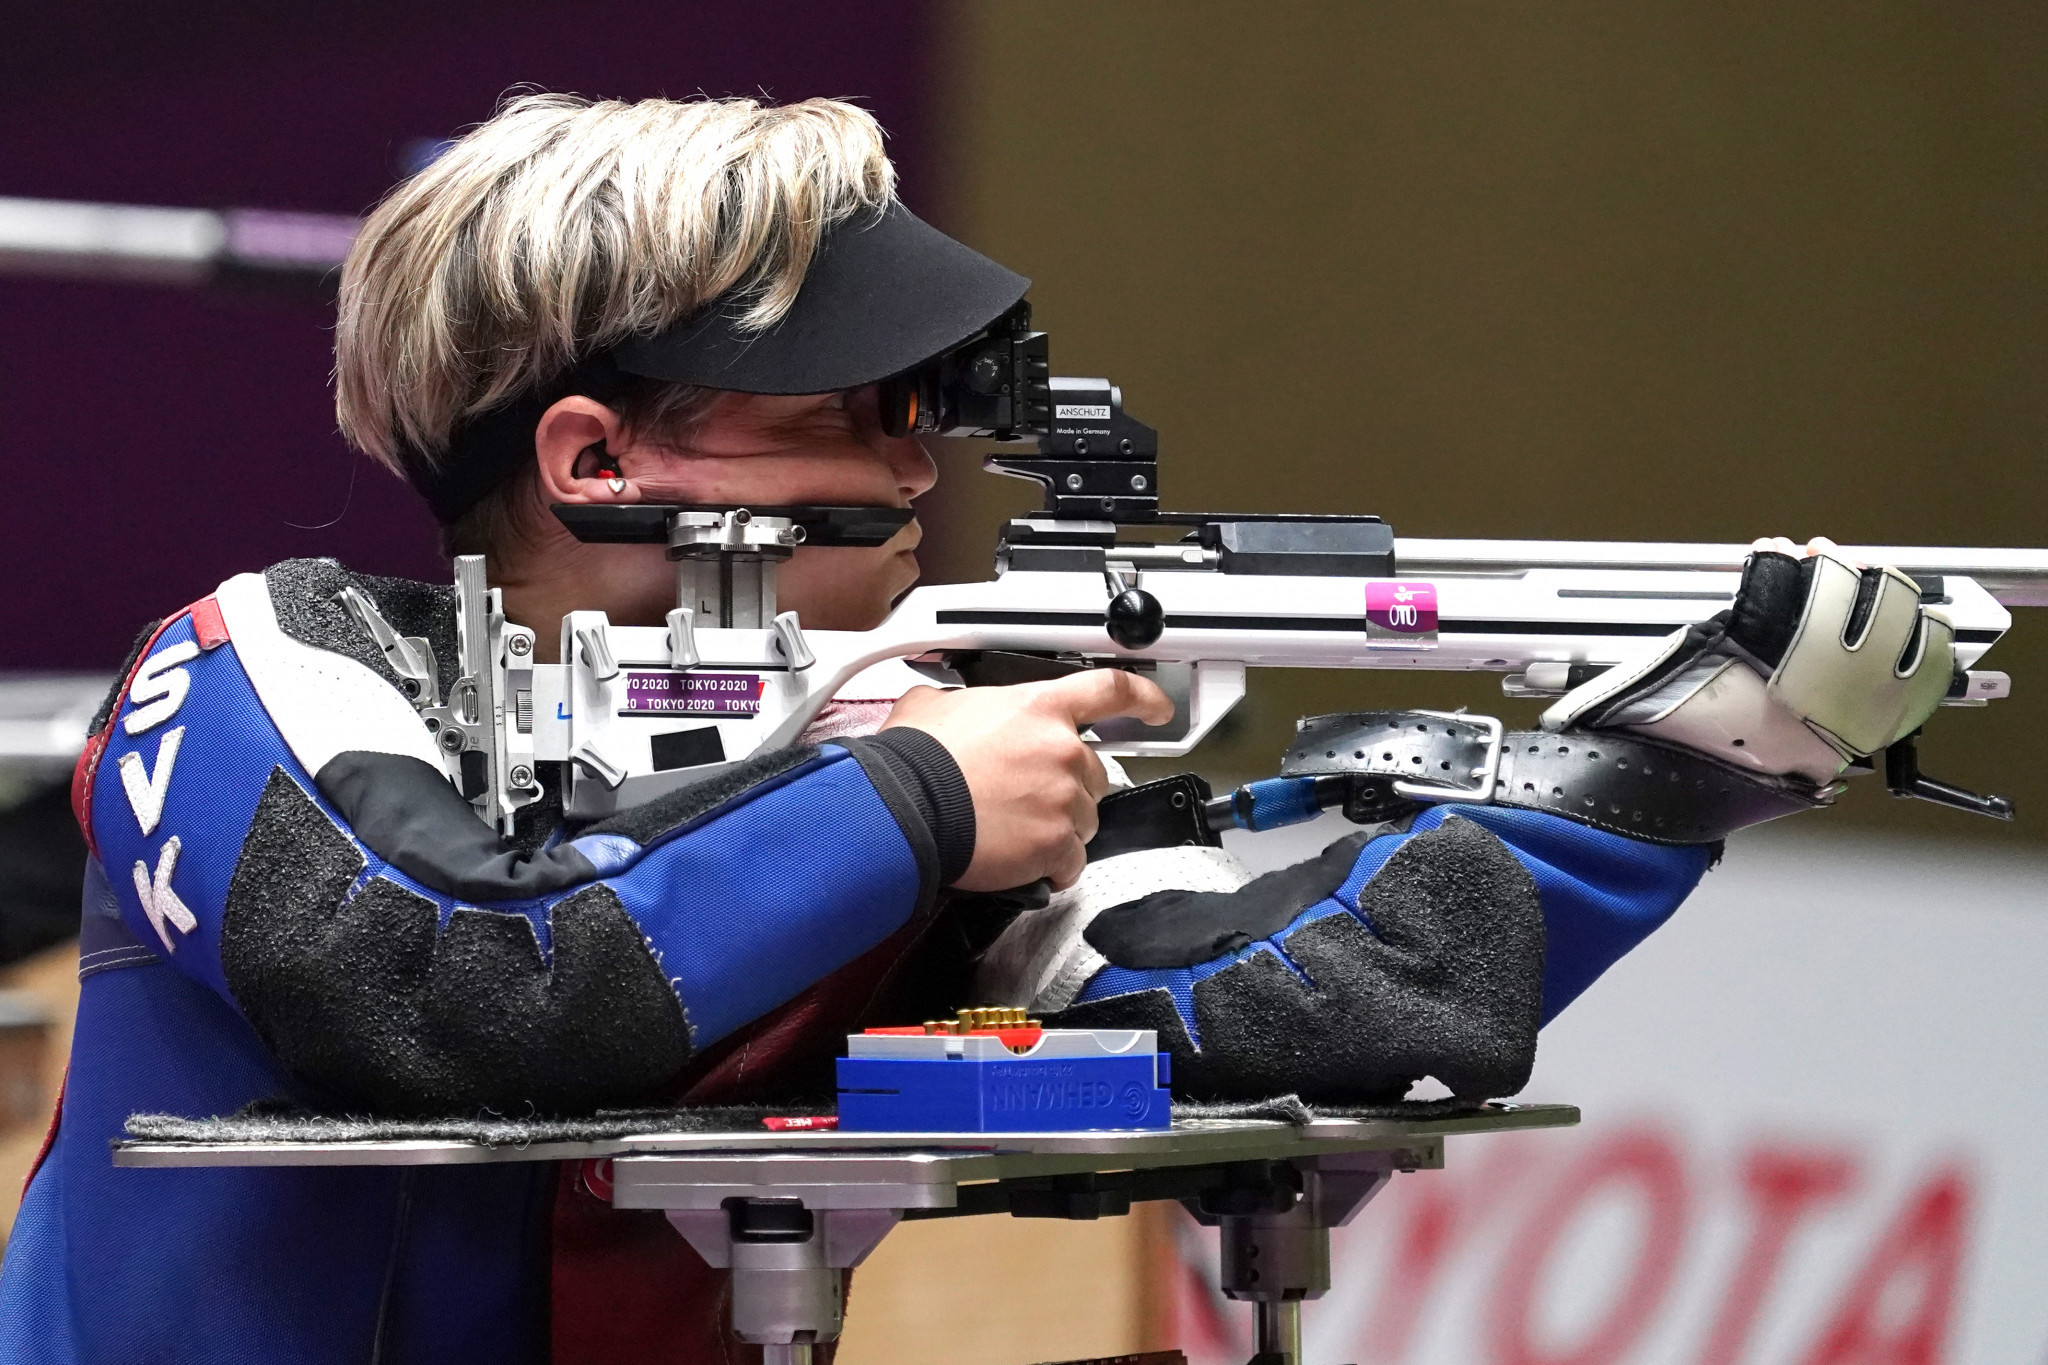 Vadovičová beats her own record for Para Shooting World Championships gold